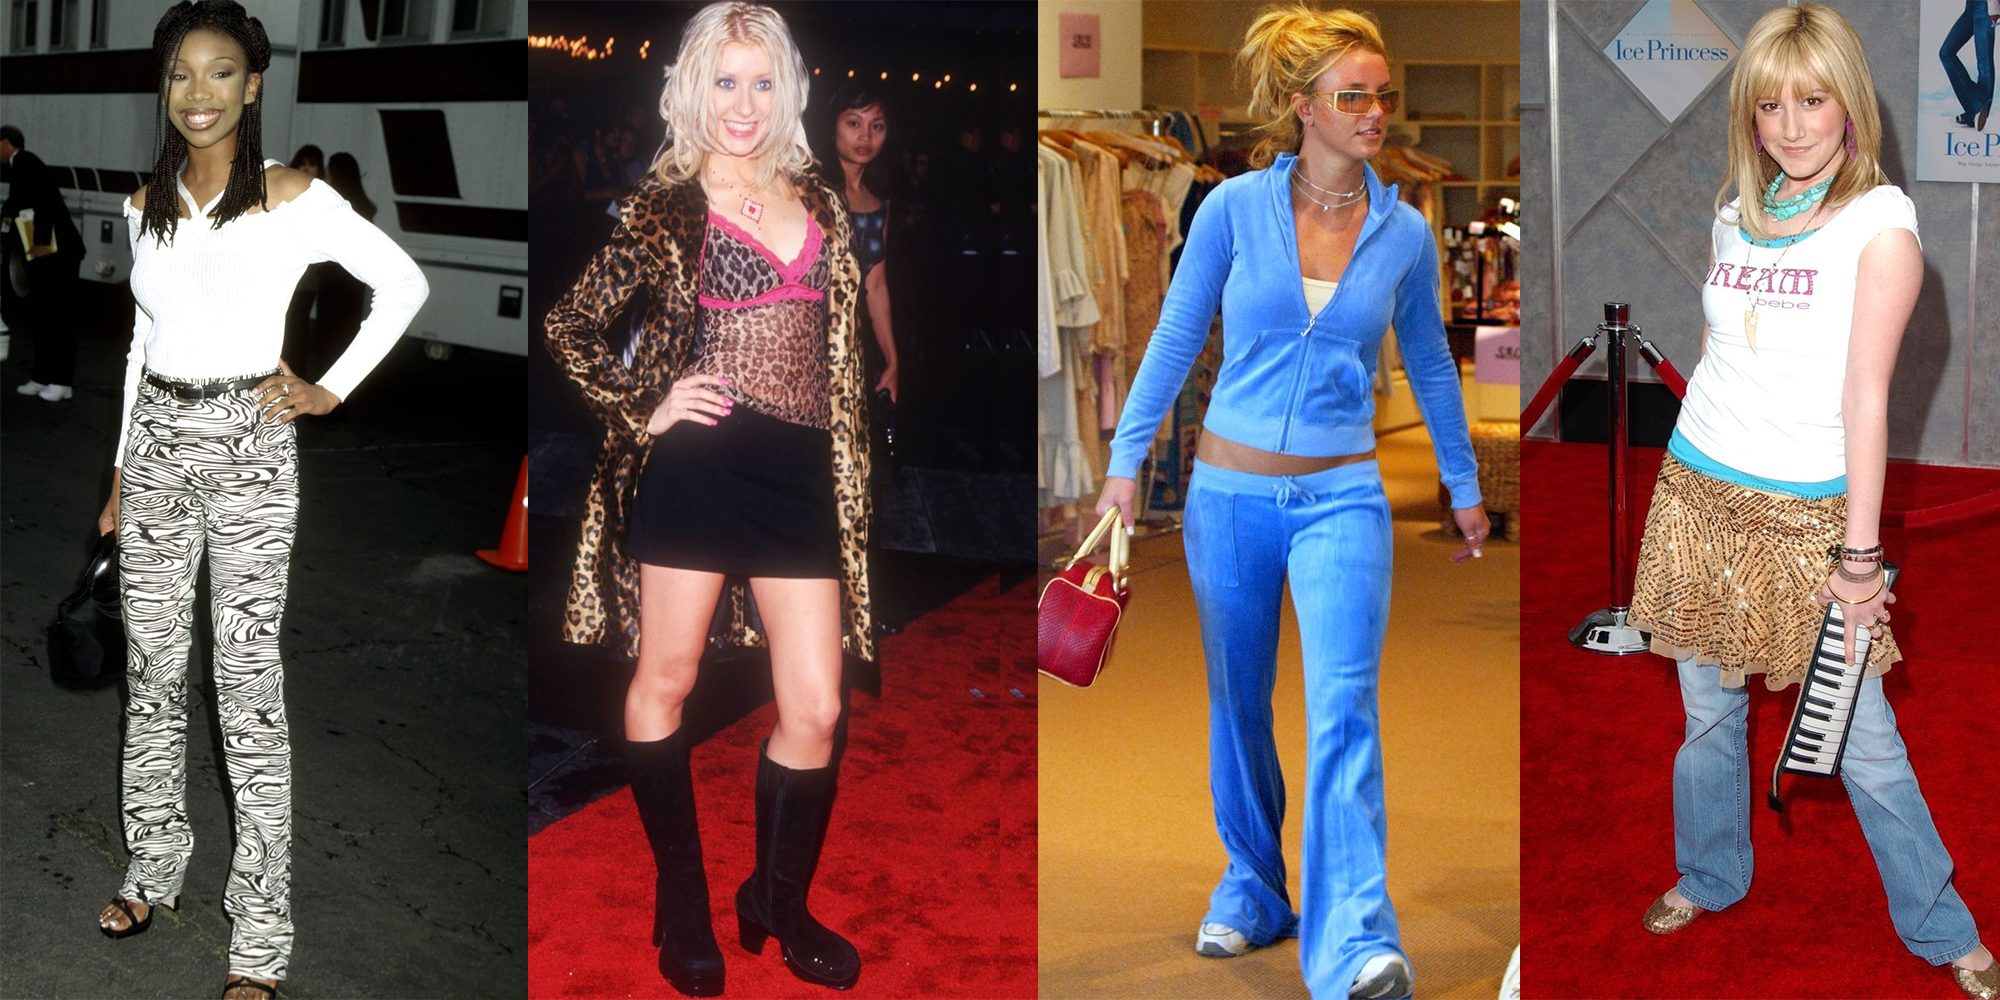 The Hills' Cast's Best 2000s Fashion Looks, According To A Costume